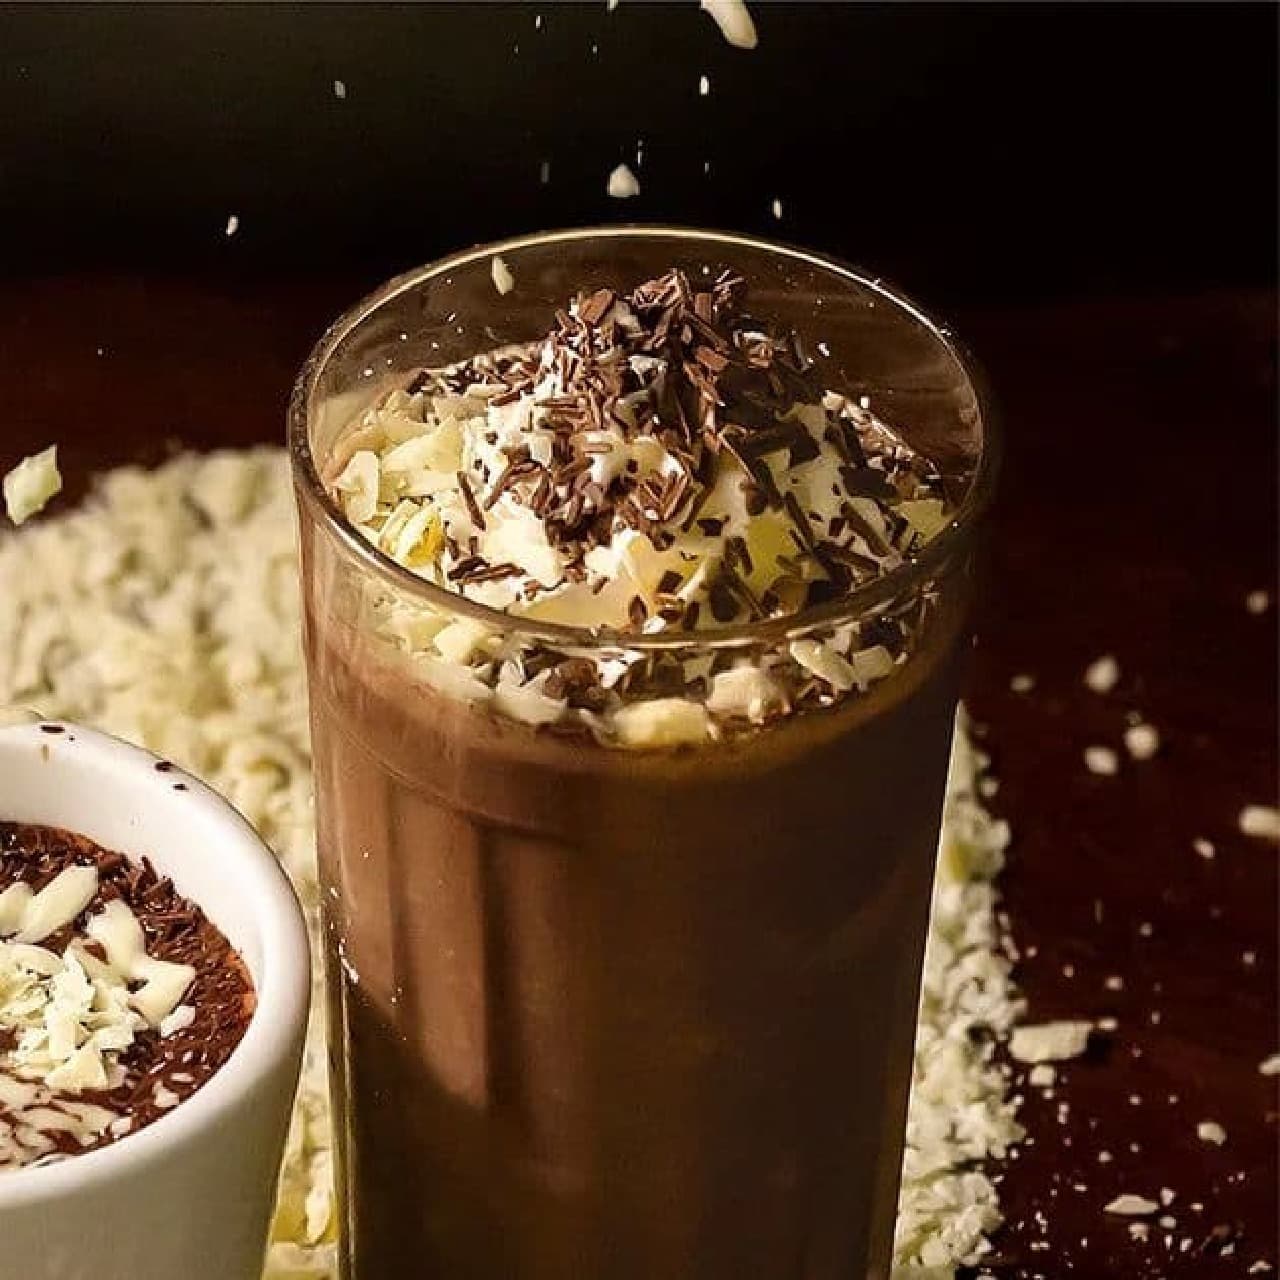 St. Mark's Cafe "Triple Melty Chocolate Smoothie